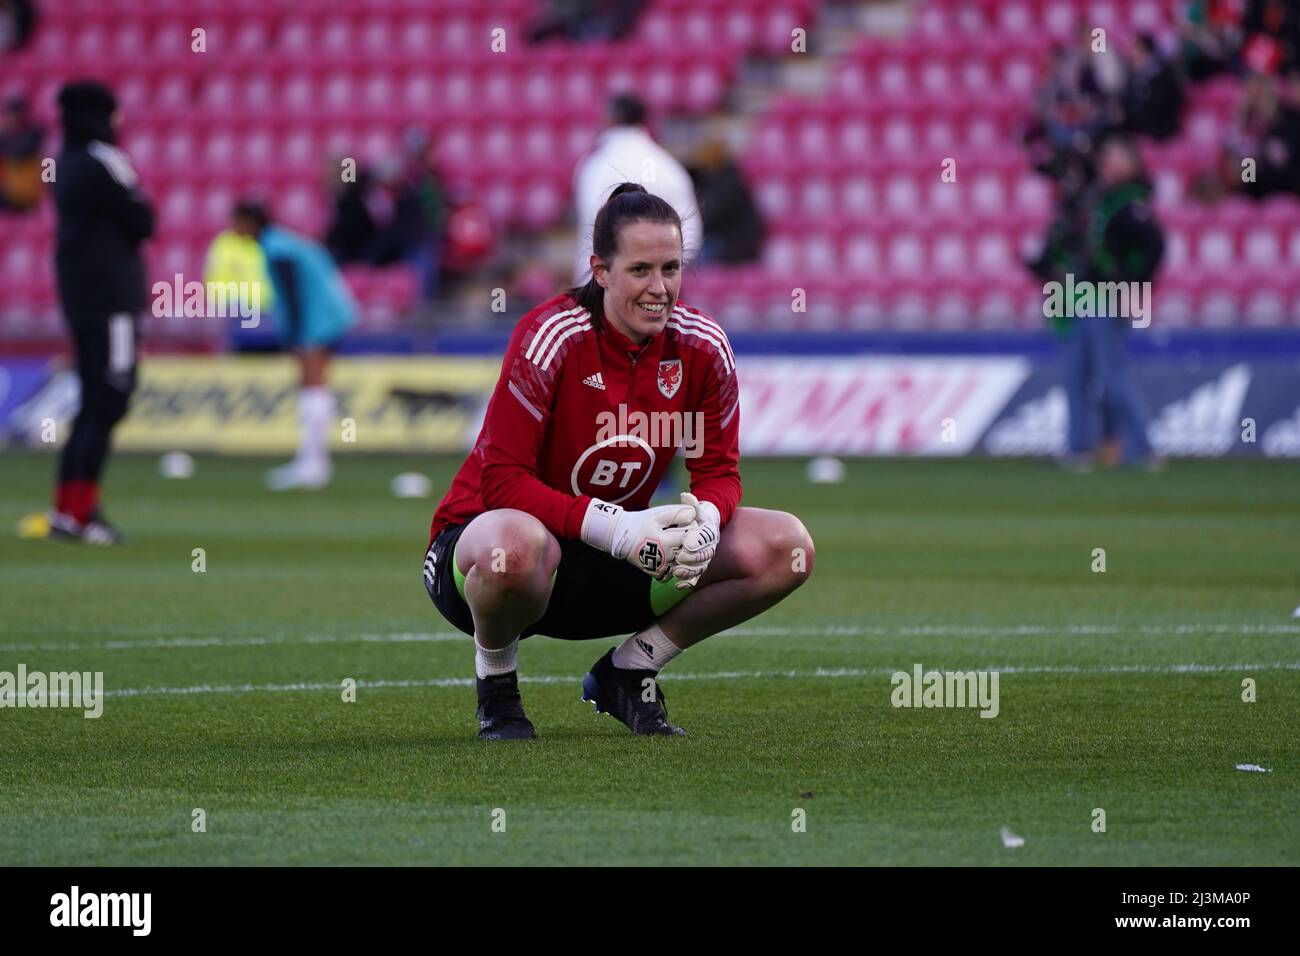 Llanelli, Wales.  8 Apr 2022, Wales Goalkeeper Laura O'Sullivan warming up before taking to the field for her 50th cap. Credit: Penallta Photographics/Alamy Live News Stock Photo